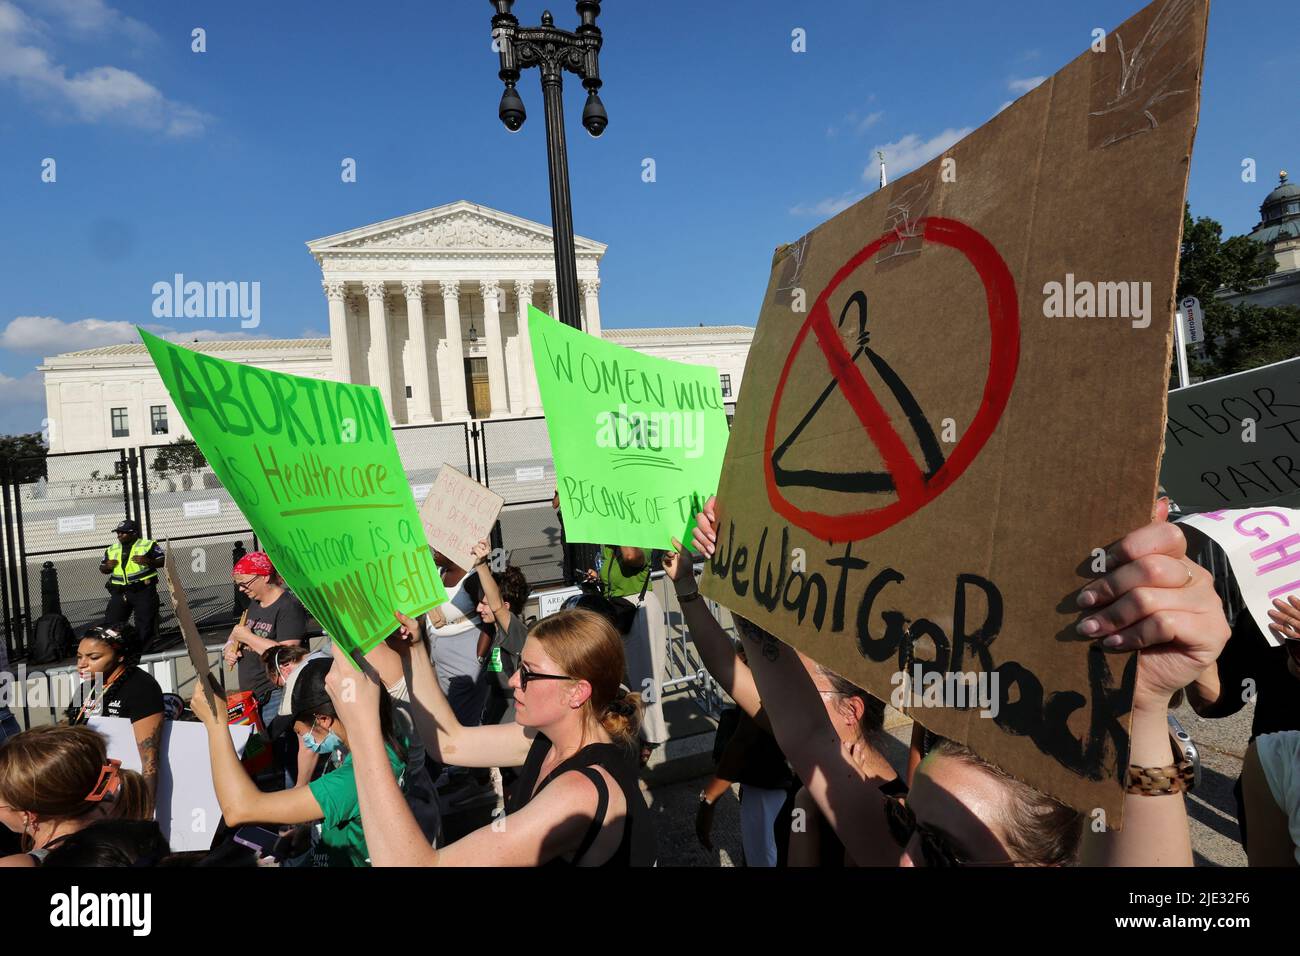 Abortion rights demonstrators protest outside the United States Supreme Court as the court rules in the Dobbs v Women's Health Organization abortion case, overturning the landmark Roe v Wade abortion decision, in Washington, DC, U.S., June 24, 2022. REUTERS/Jim Bourg Stock Photo